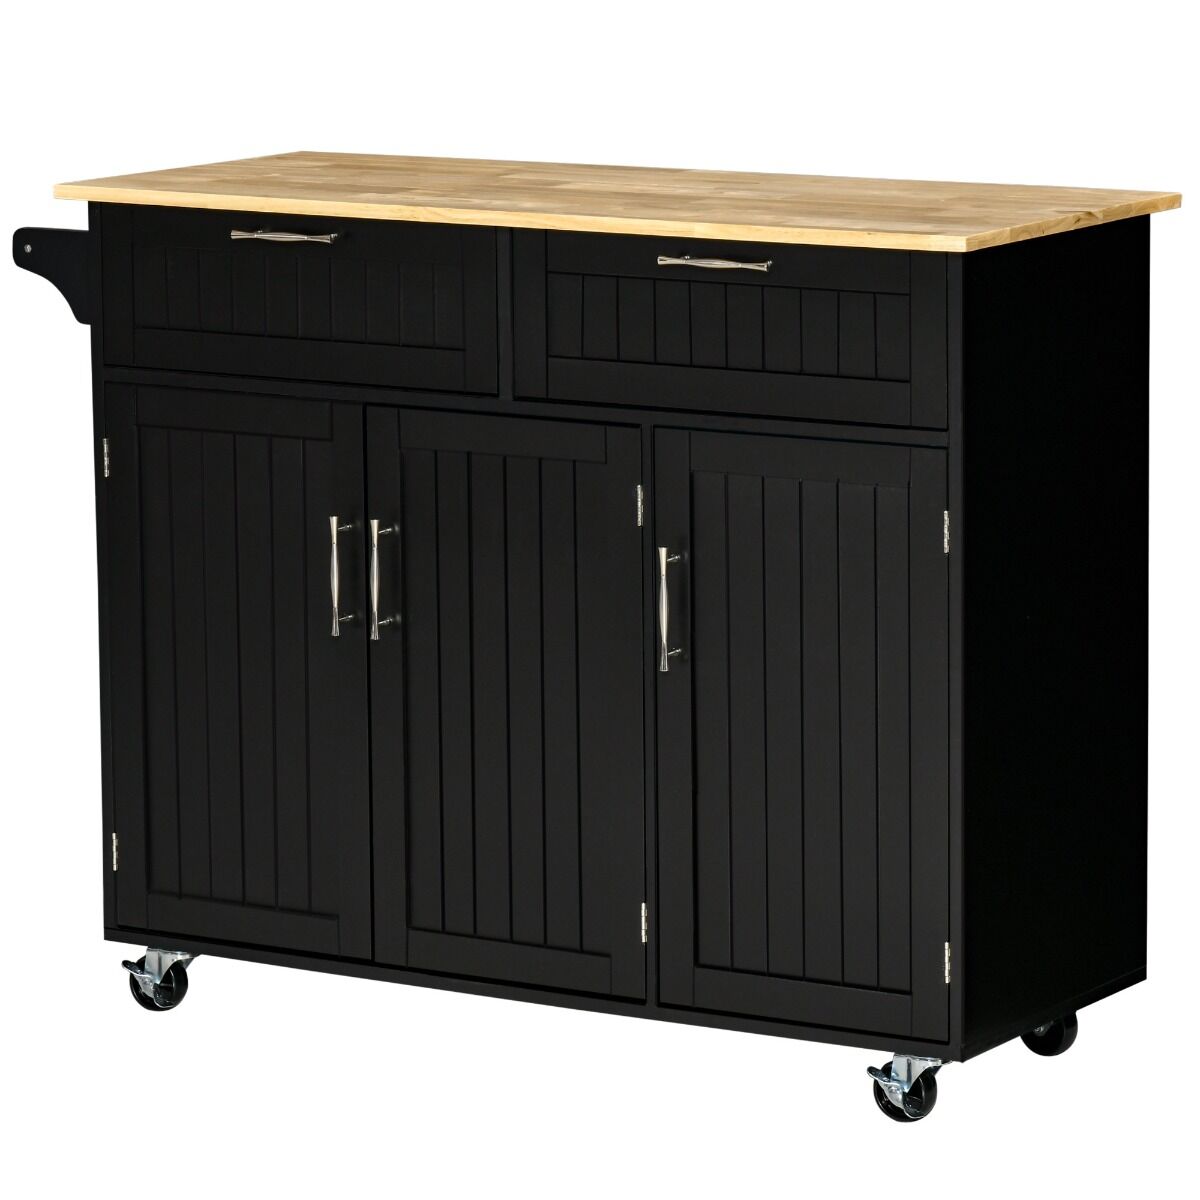 HOMCOM Mobile Black Kitchen Island, Spacious with Drawers, Cabinet Storage, Perfect for Dining Areas   Aosom.com